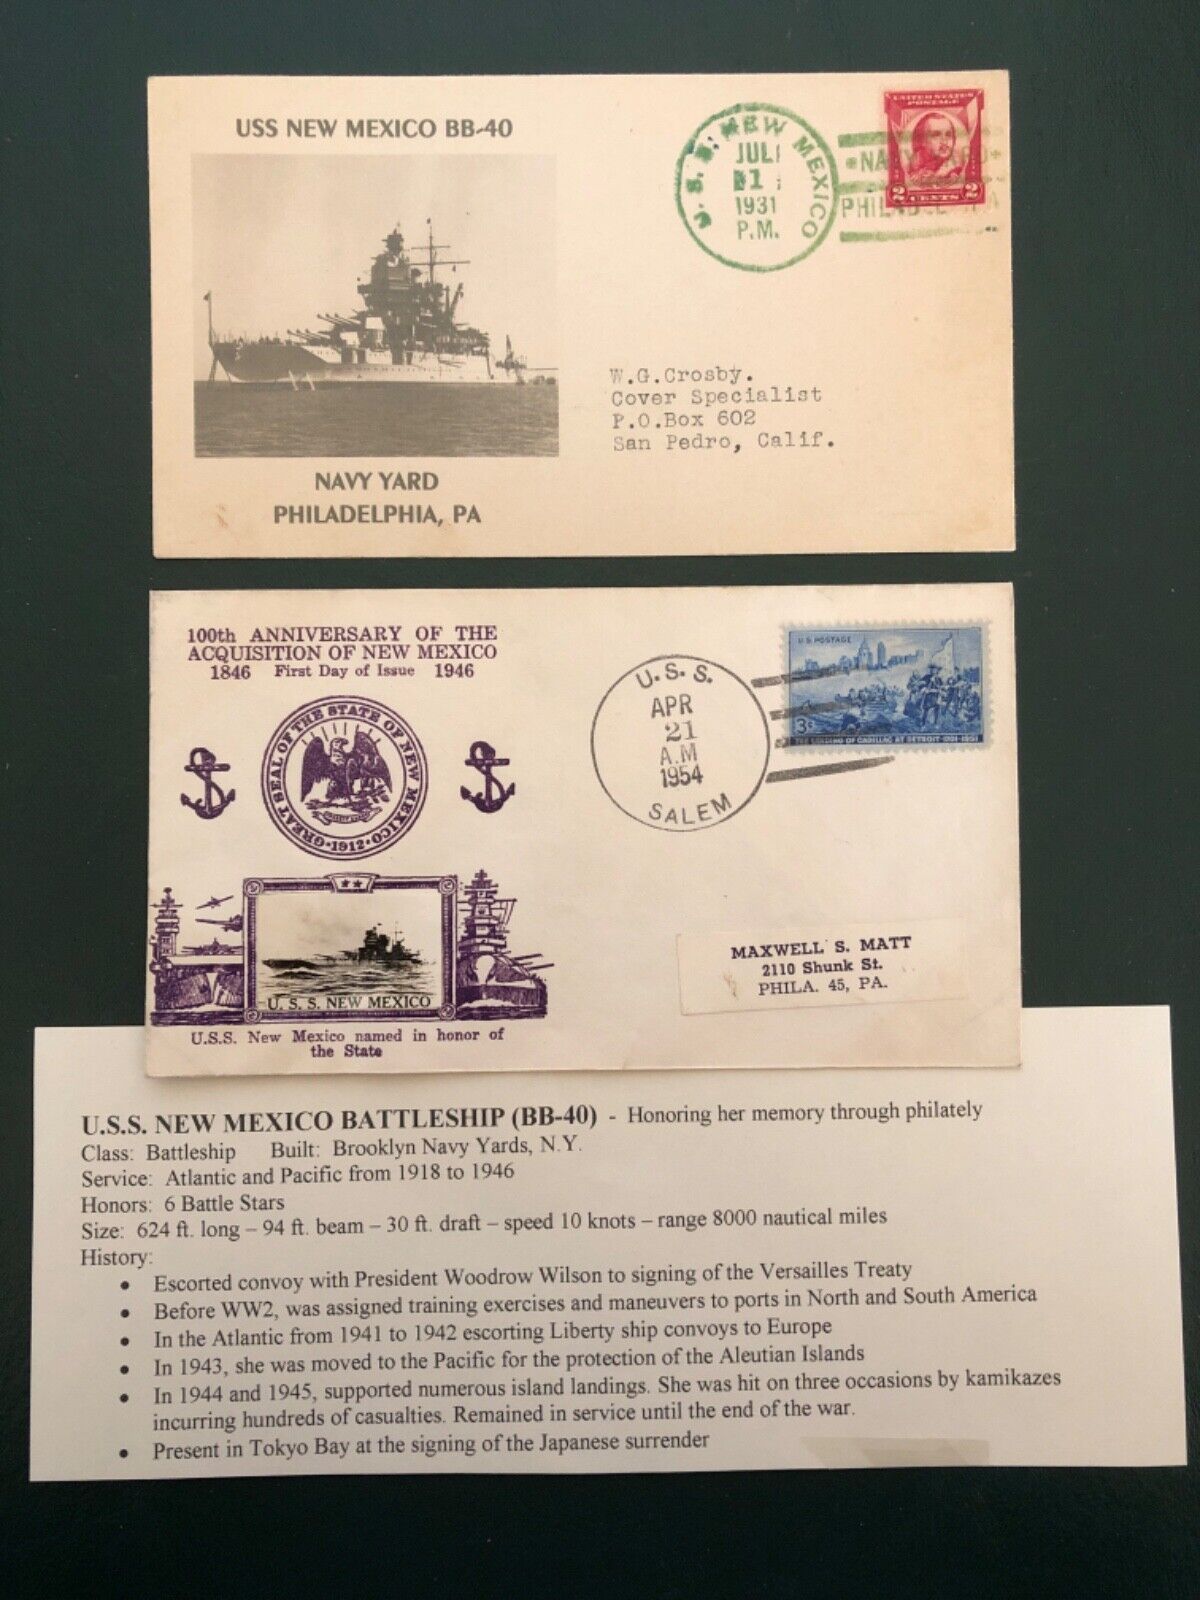 STAMPS U.S.- 2 U.S.S. NEW MEXICO COVERS- cachets-honor her sacrifice